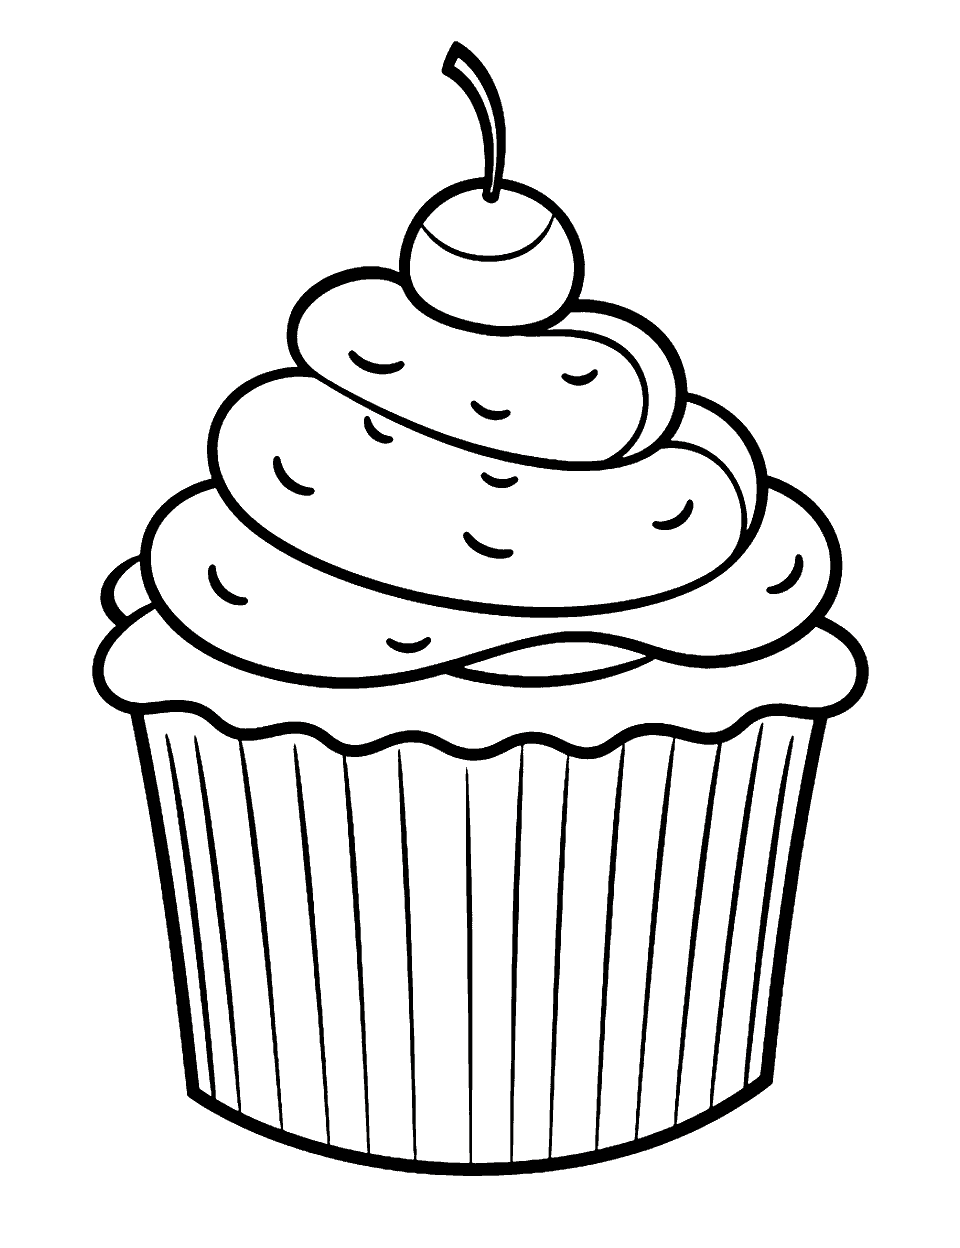 Simple Cupcake Design Coloring Page - One cupcake with a basic swirl of frosting on a plain background.